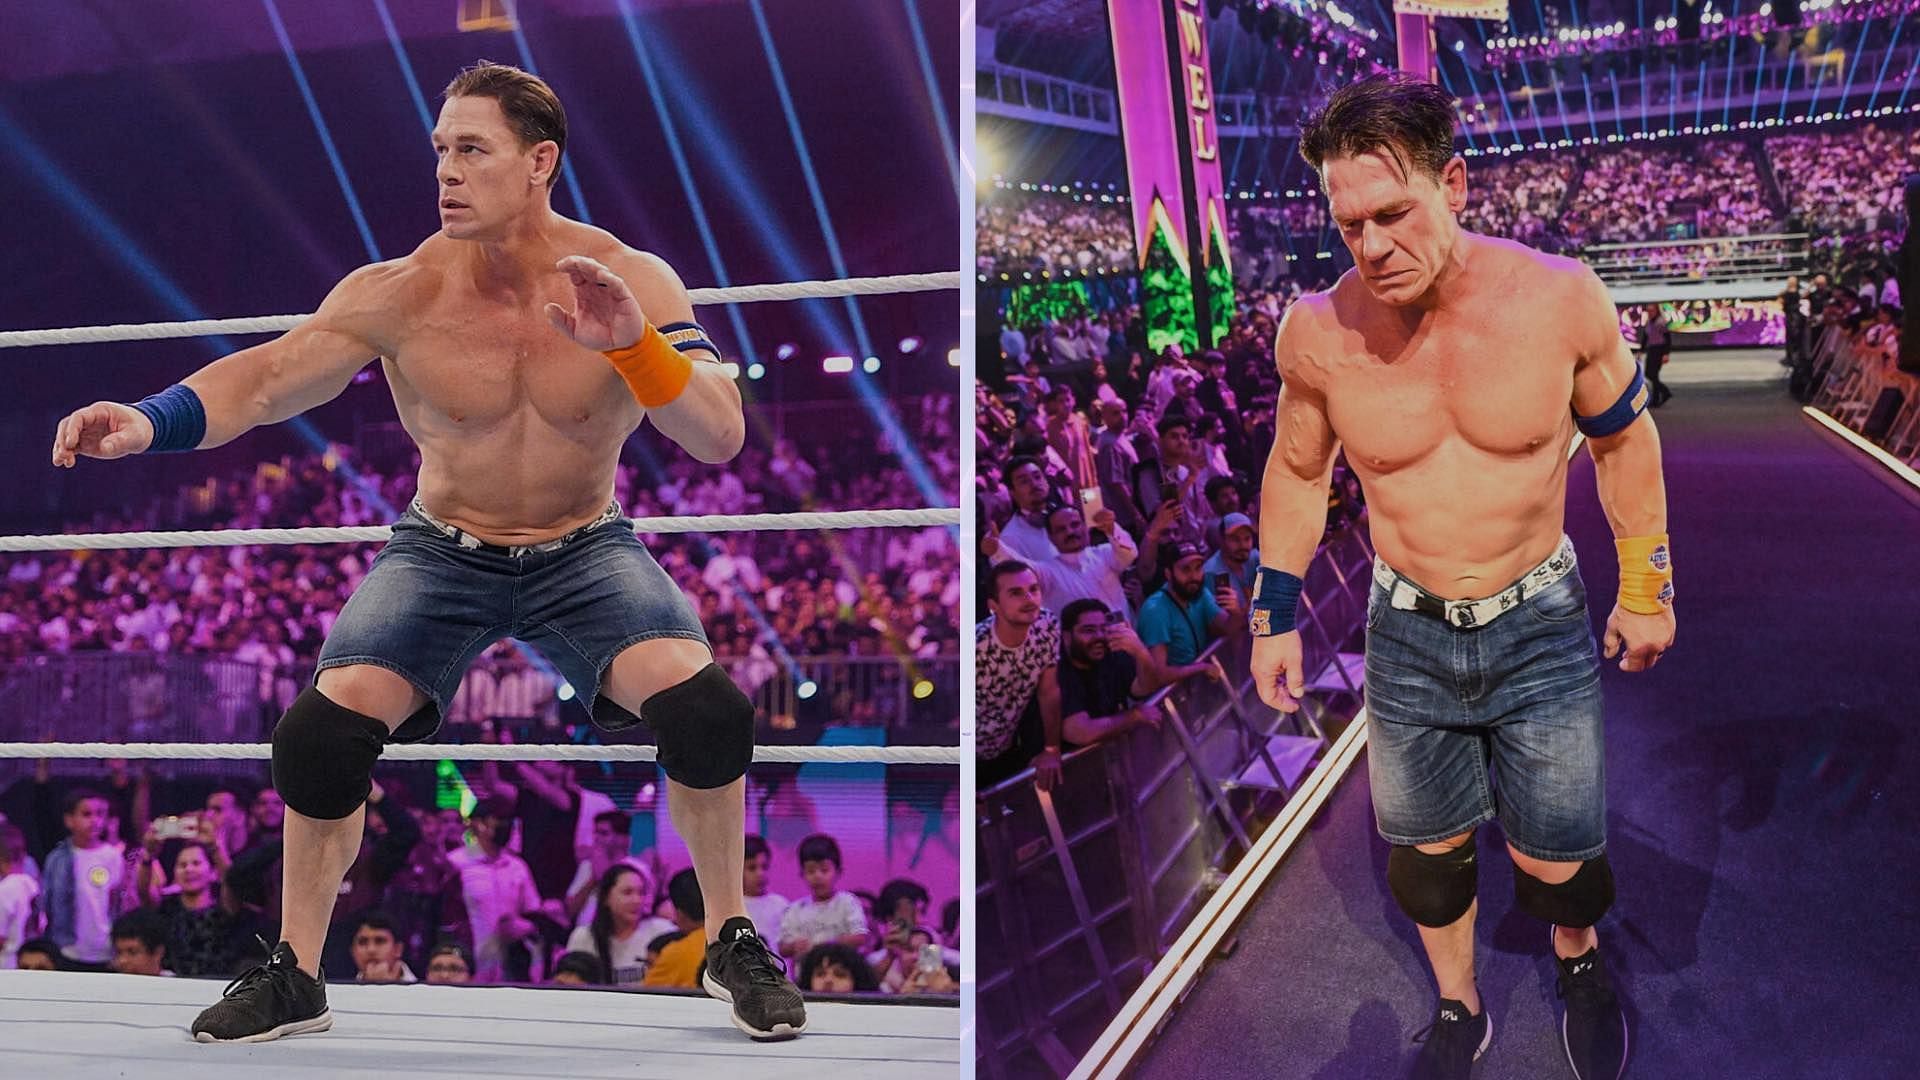 John Cena could end his career against his famous WWE rival